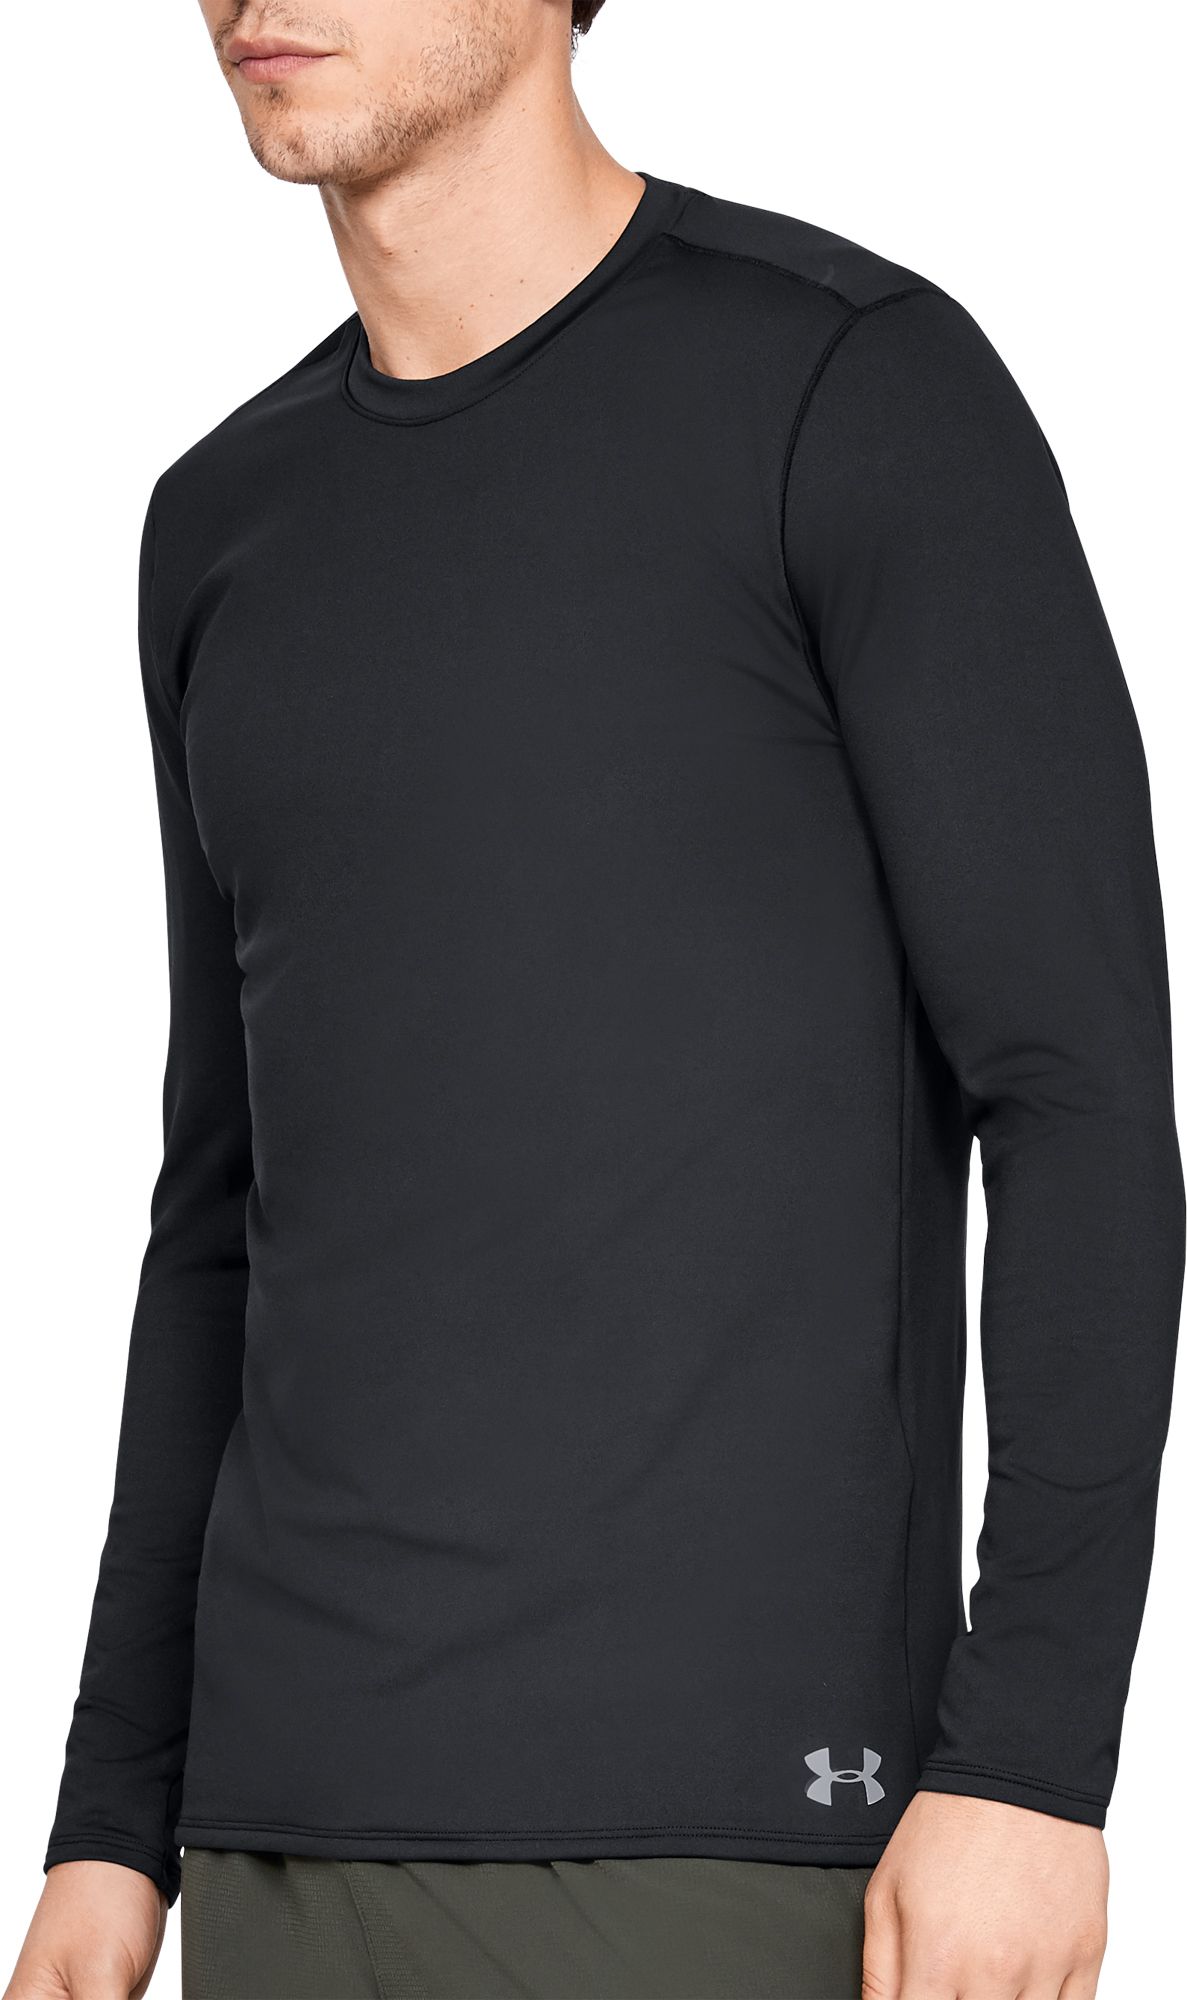 Under Armour Men's ColdGear Fitted Crew 